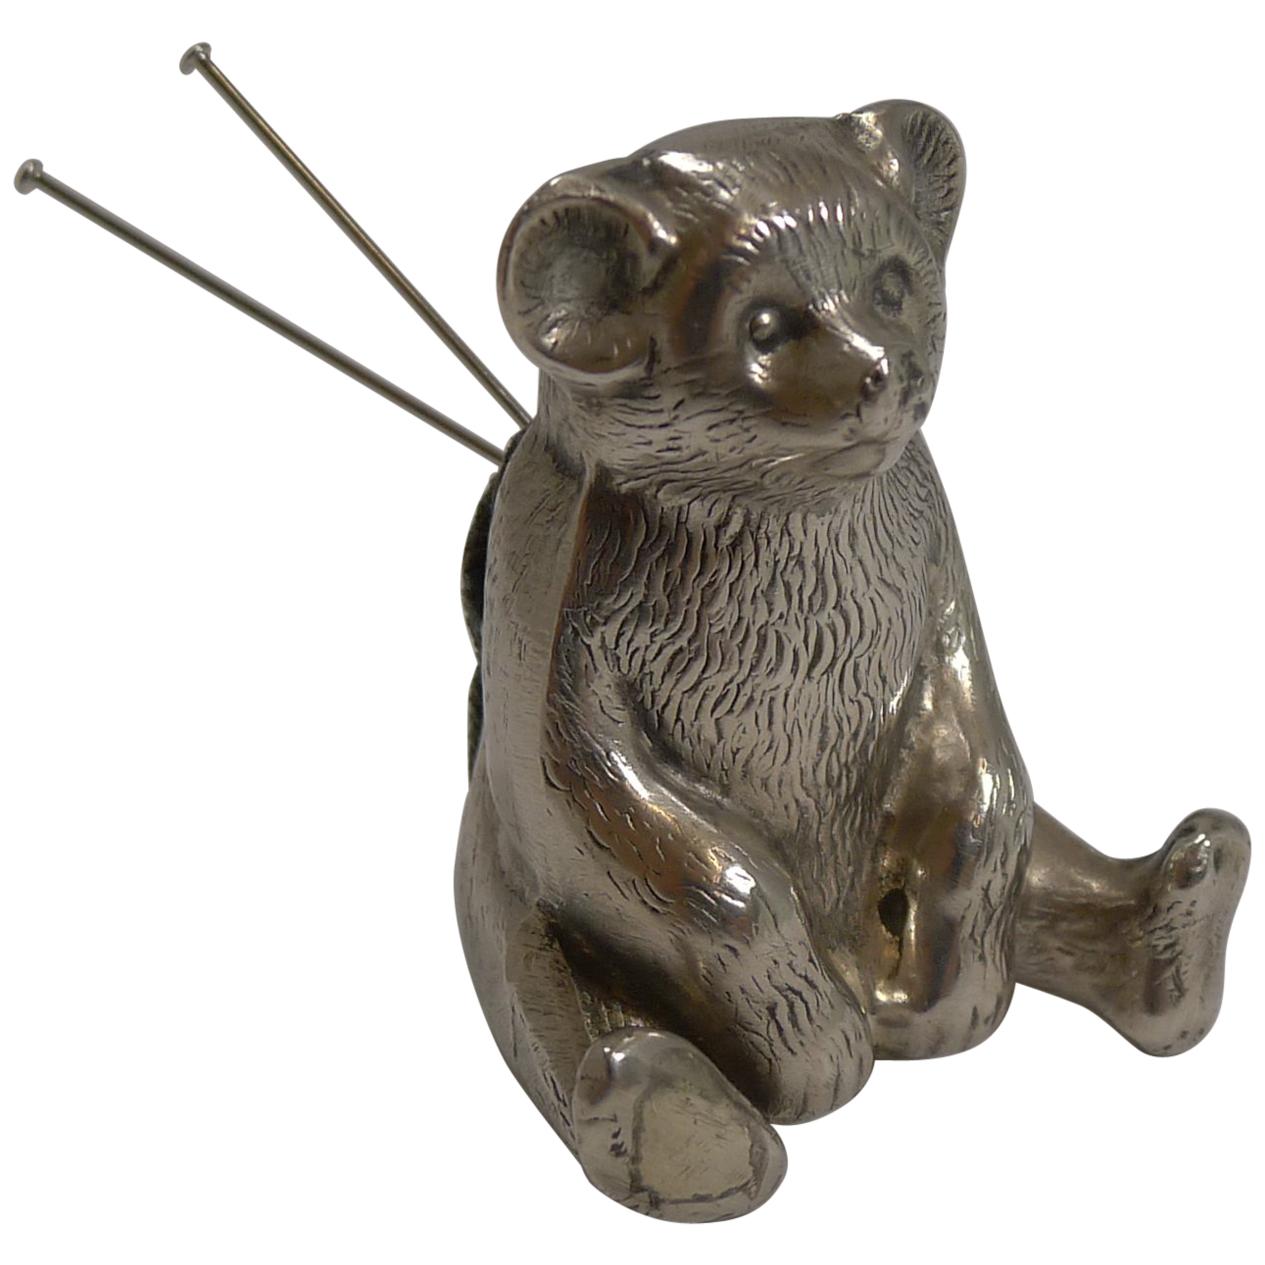 Antique English Novelty Pin Cushion in Sterling Silver Teddy Bear, 1909